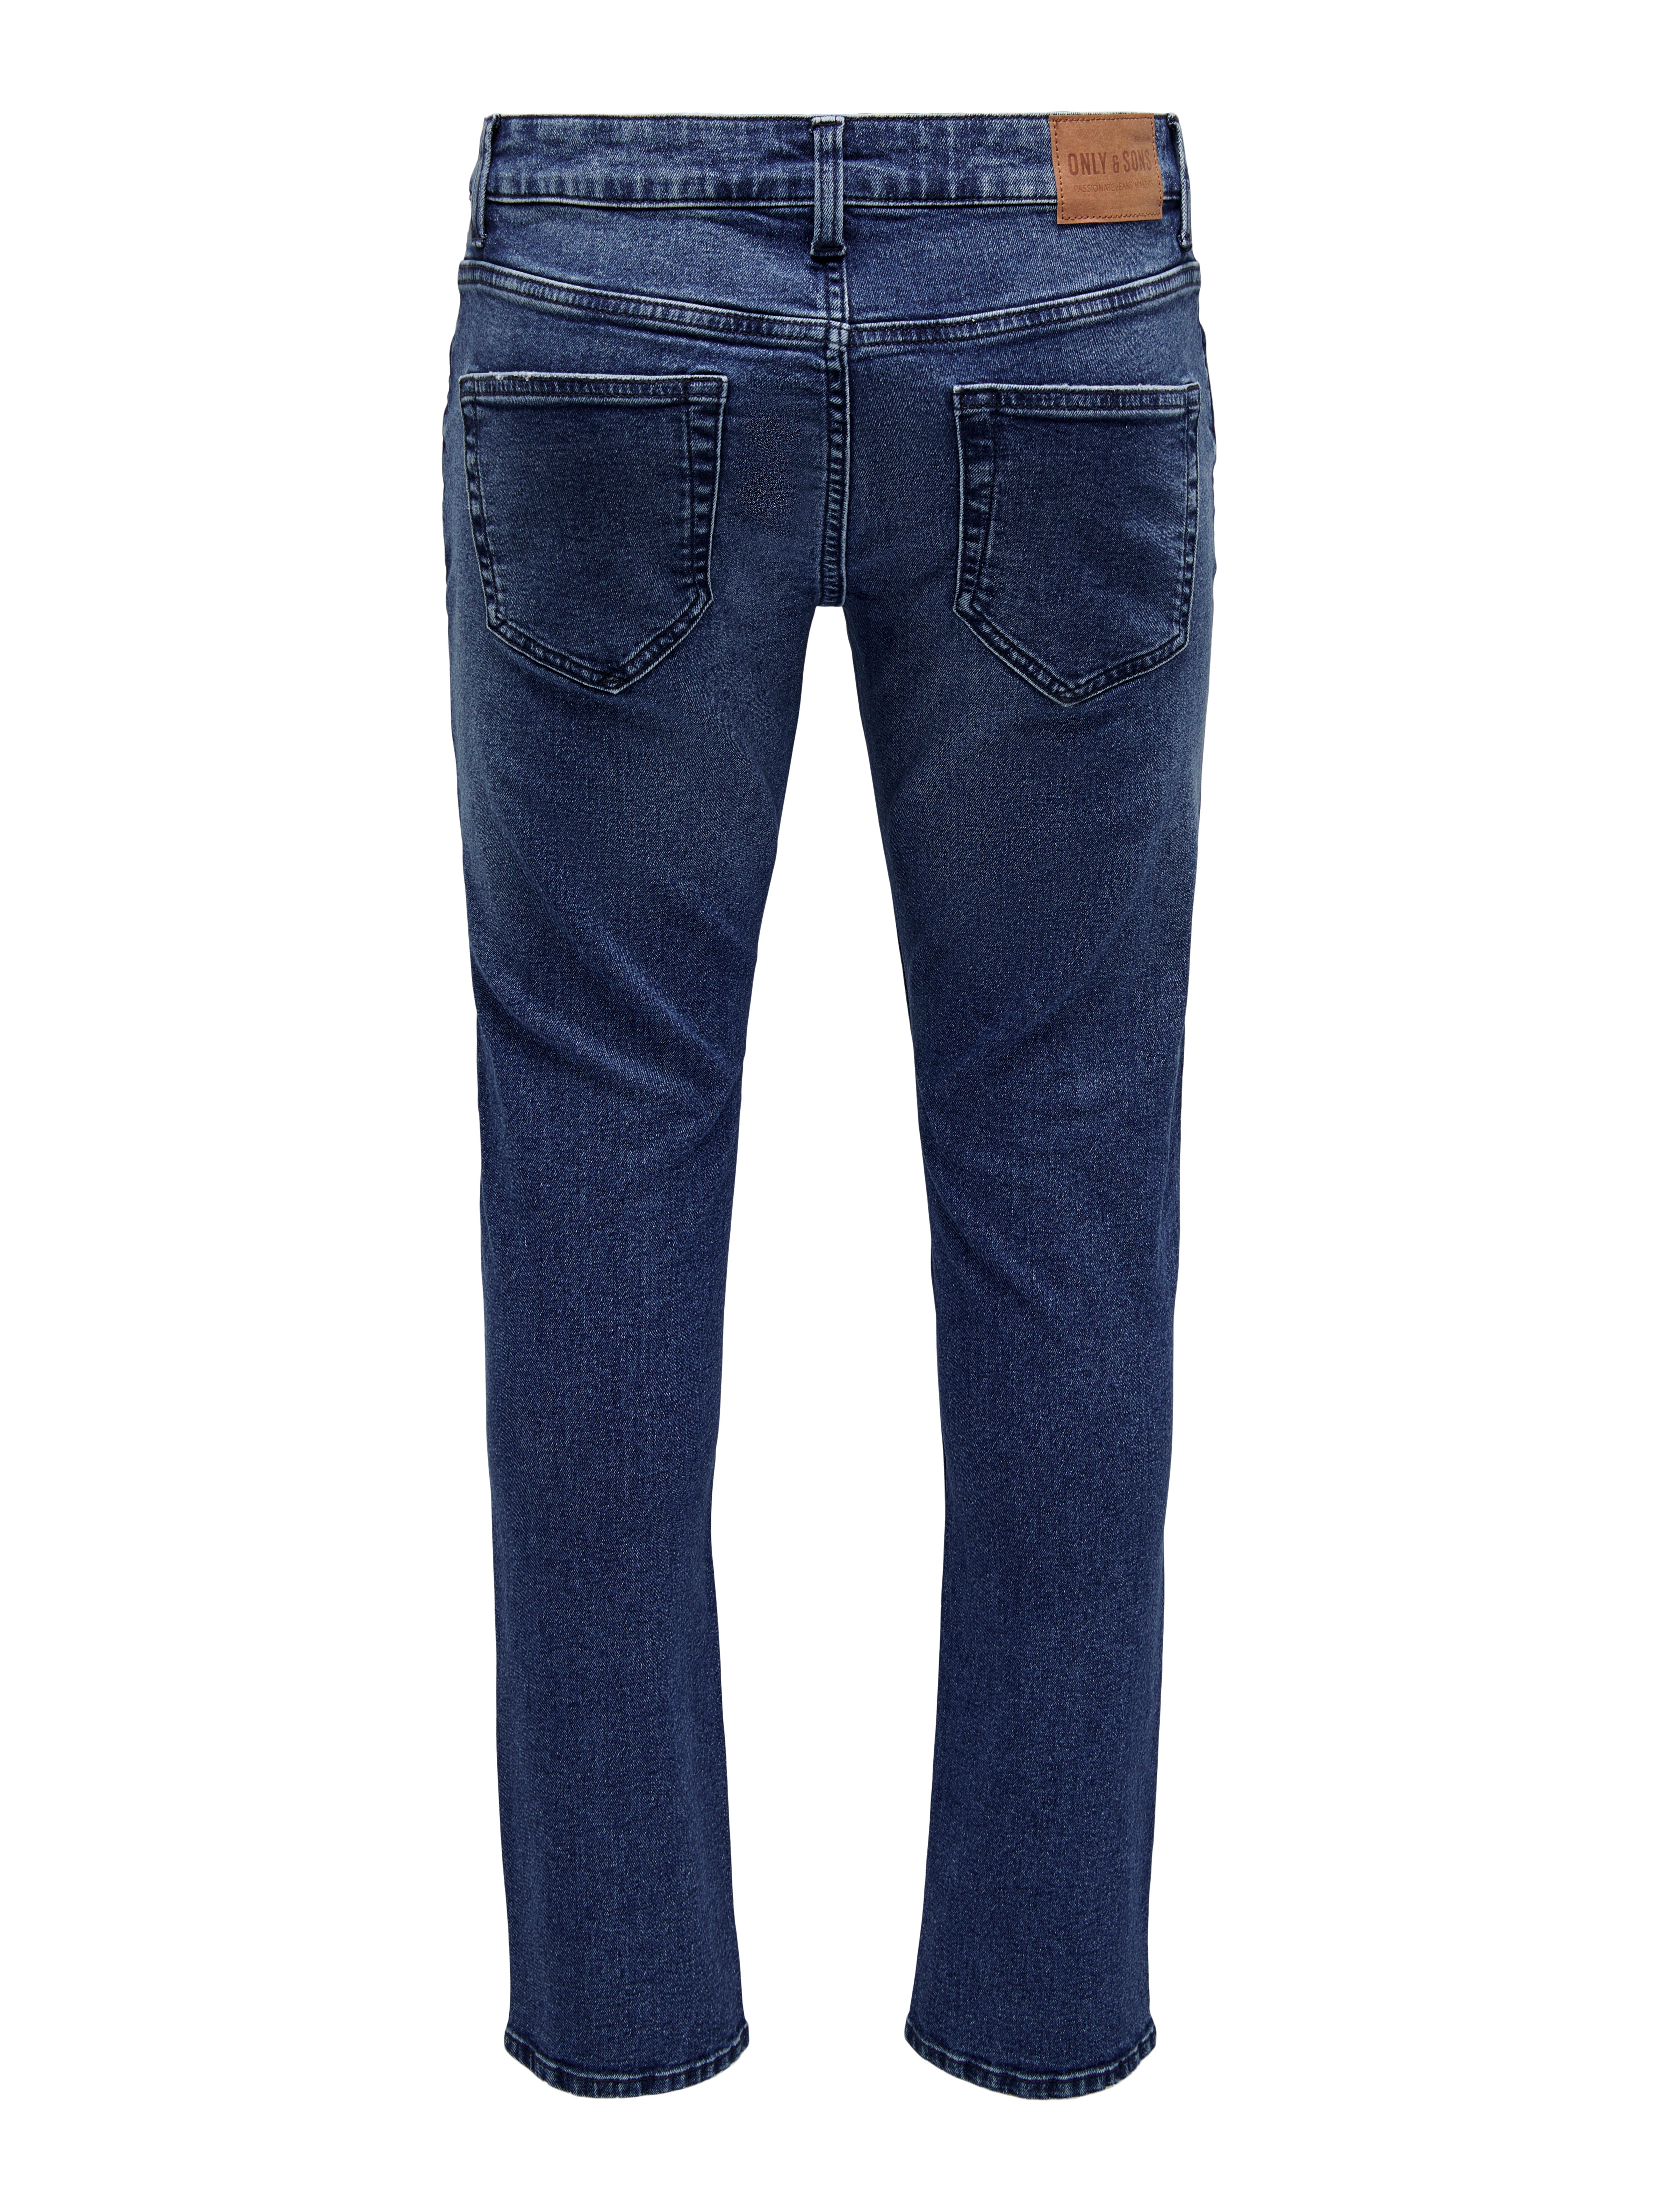 JDY by ONLY Dark Blue High Rise Skinny Jeans